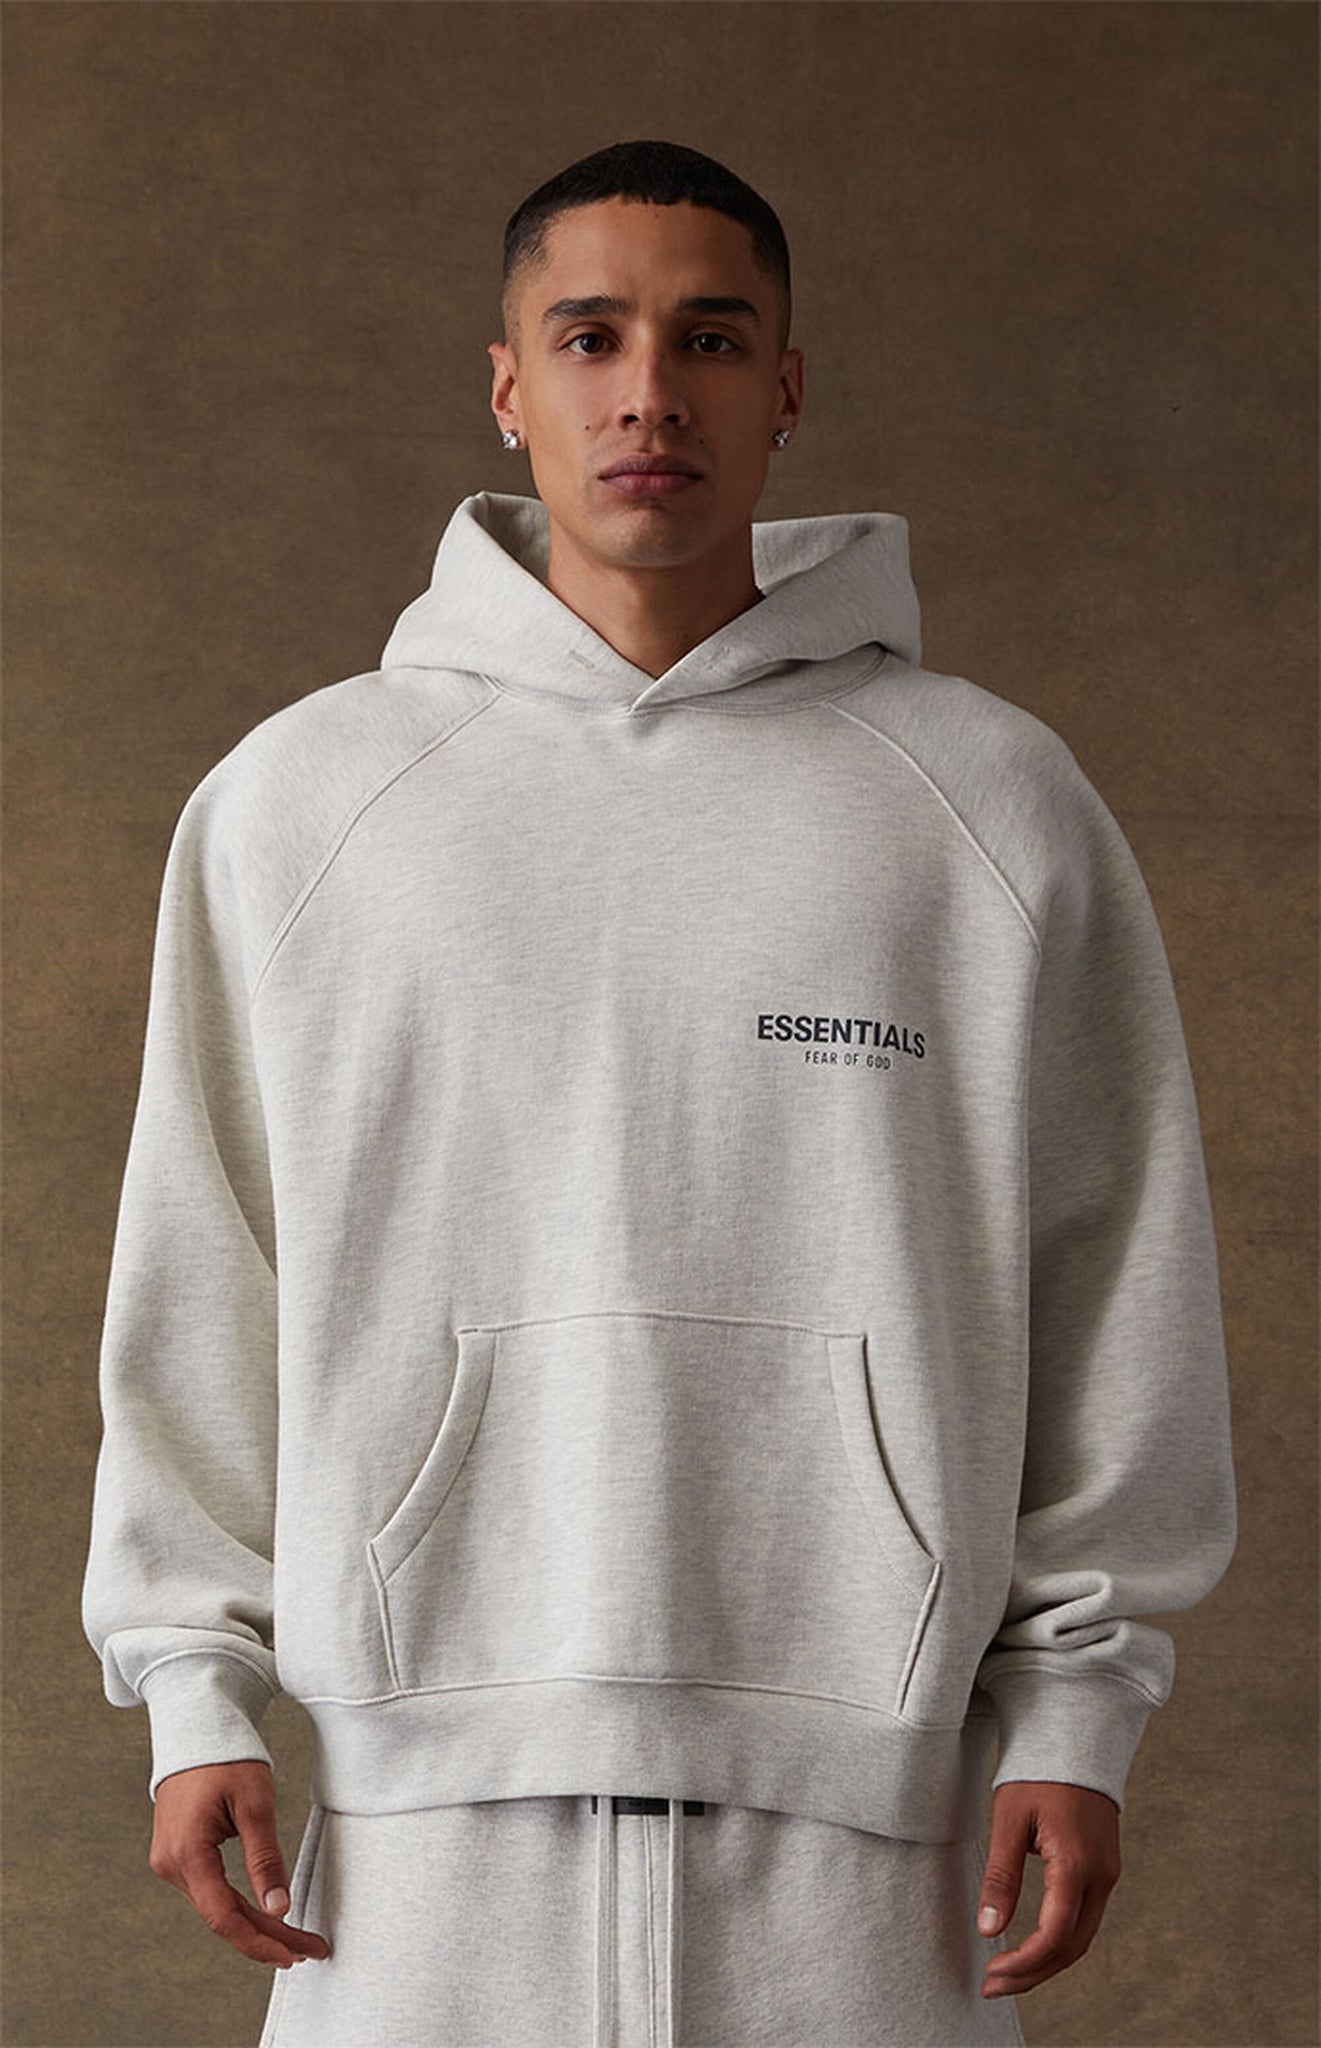 Fear of God ESSENTIALS: Gray Pullover Hoodie